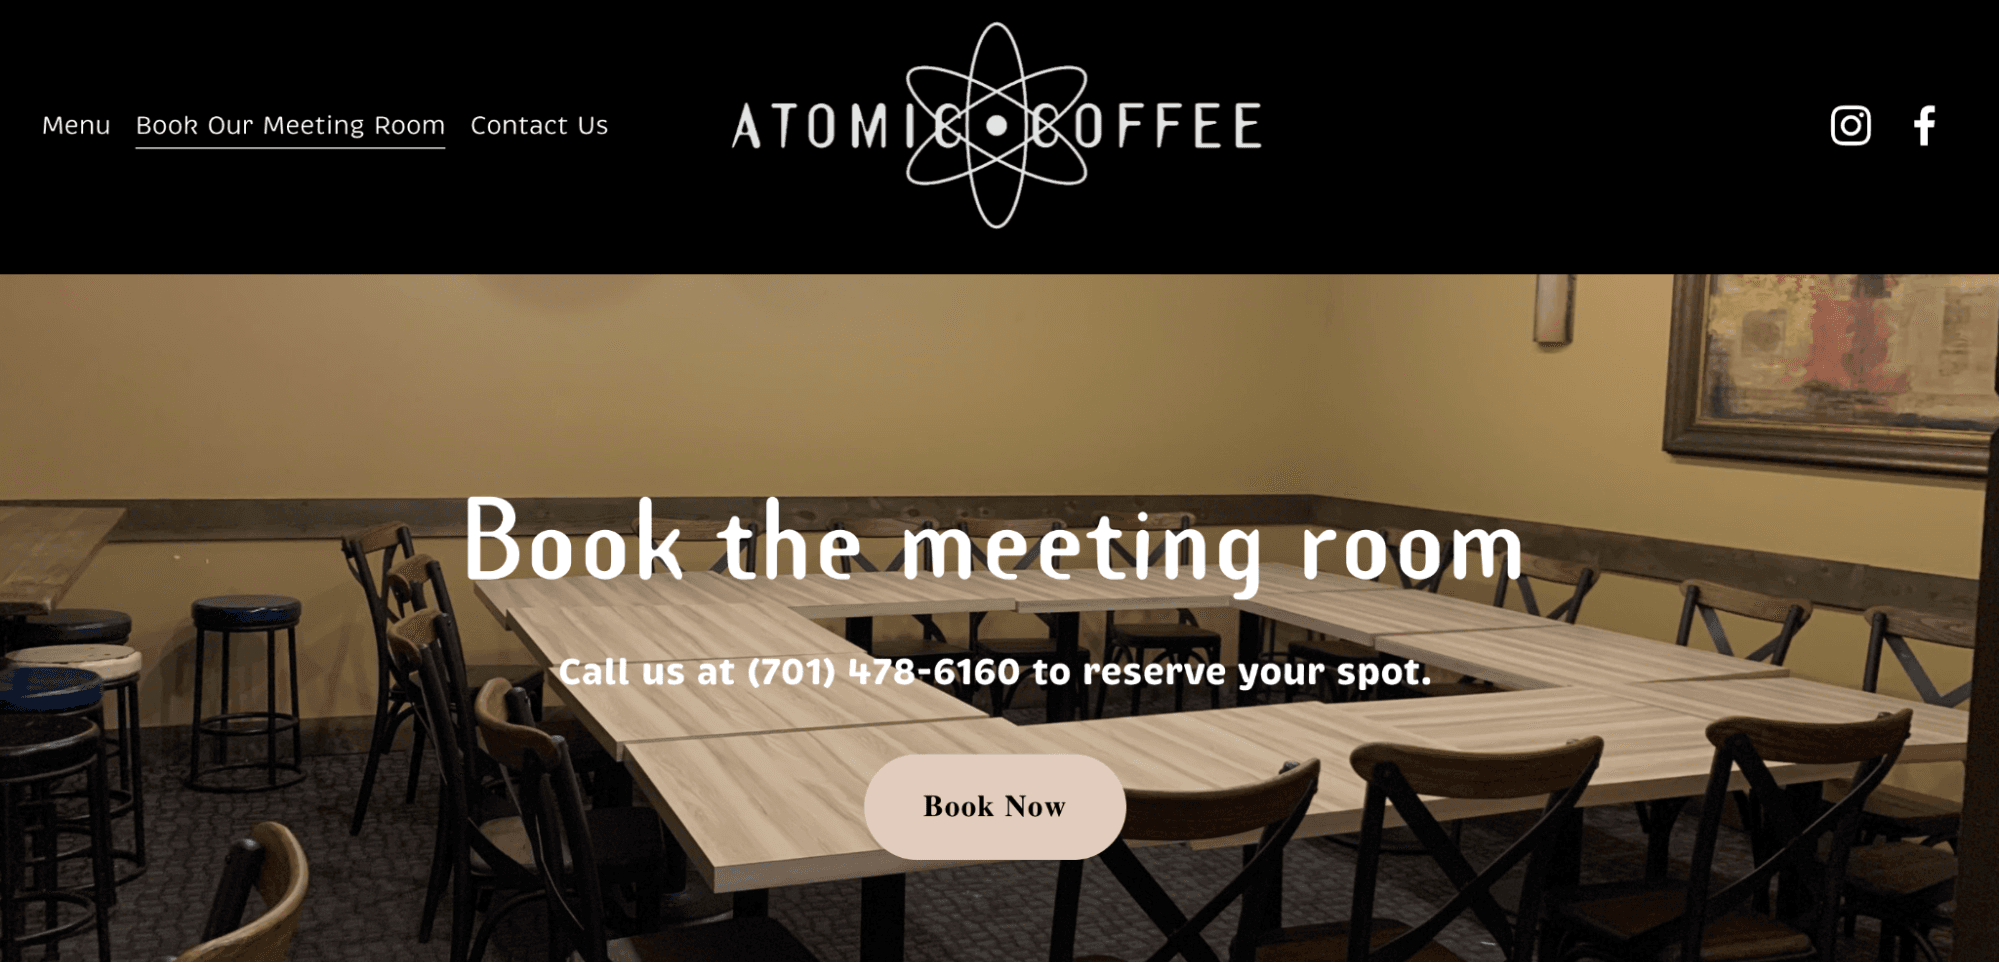 Example of offering private meeting space from Atomic Coffee